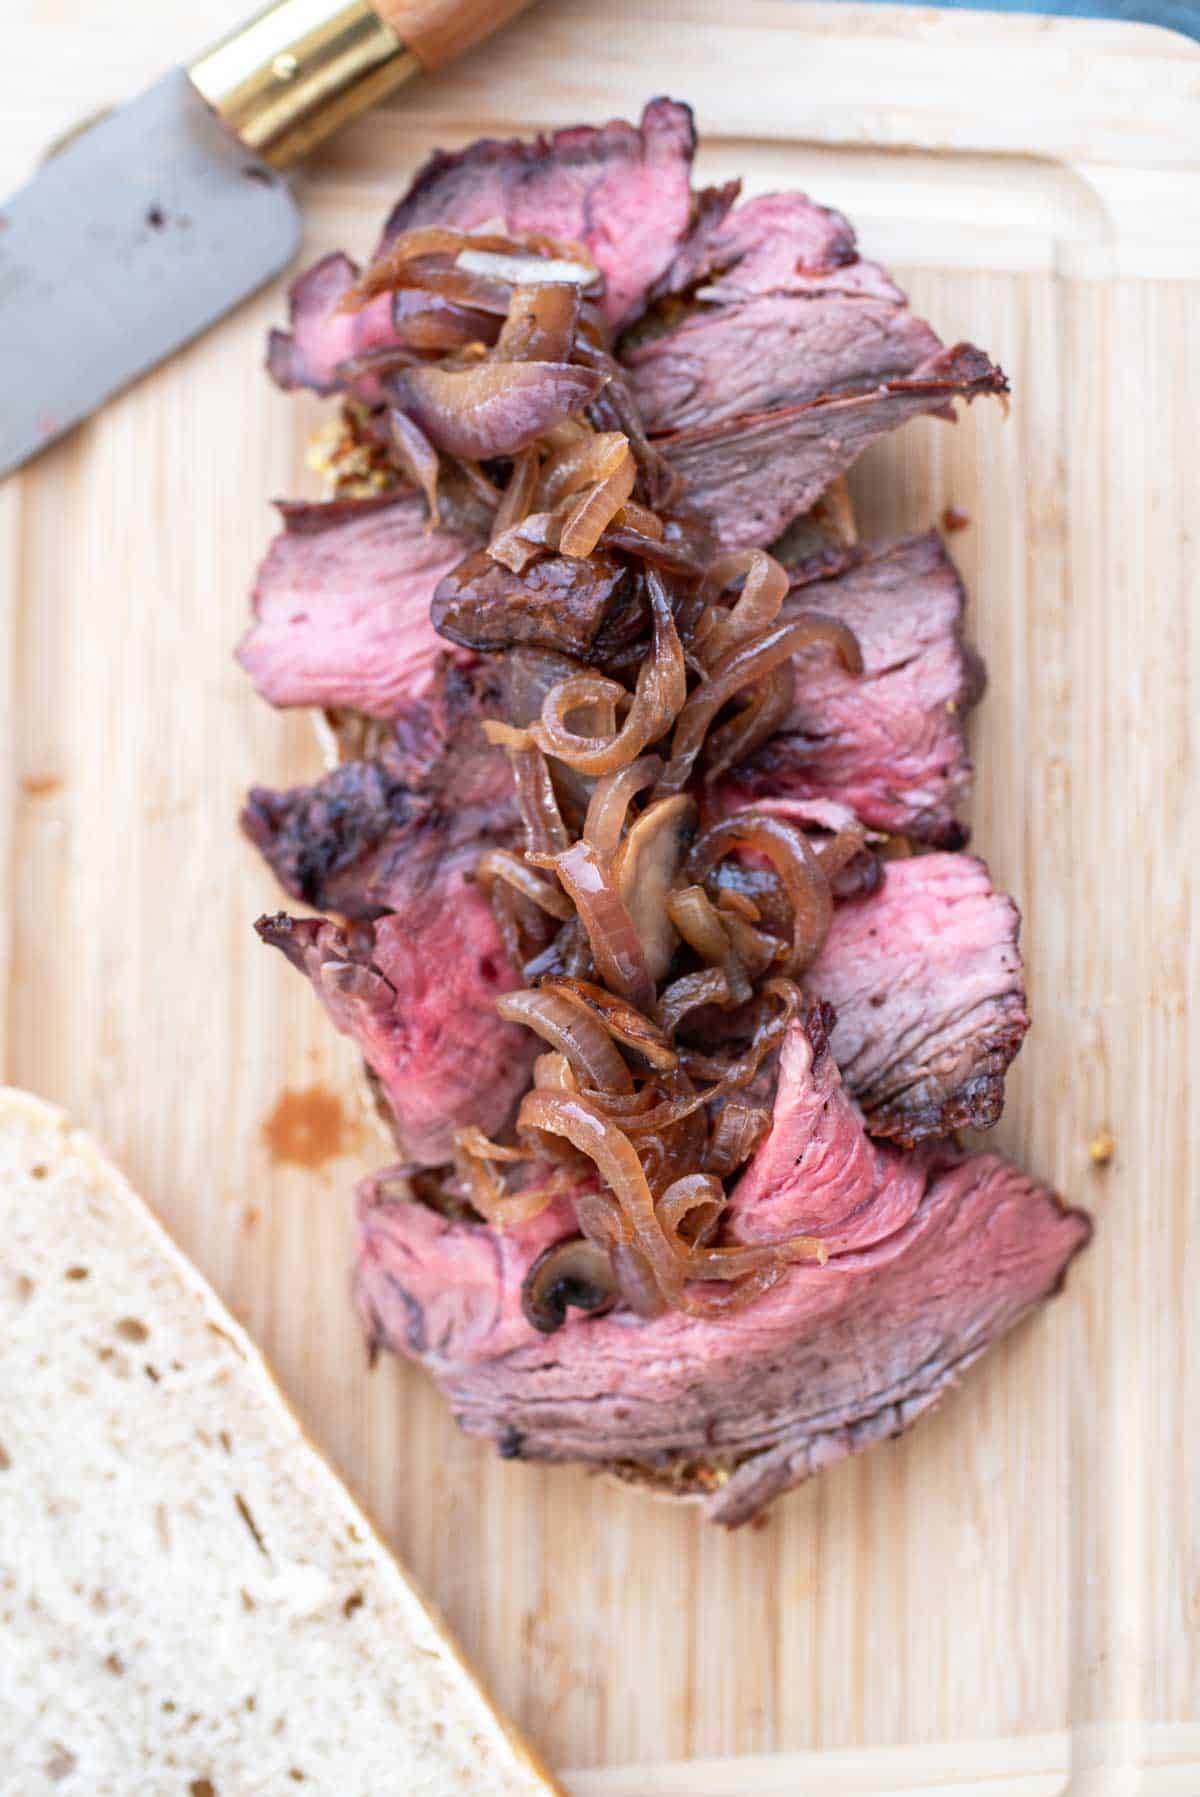 Sliced medium-rare beef on a slice of bread topped with caramelized onions on a wooden cutting board.